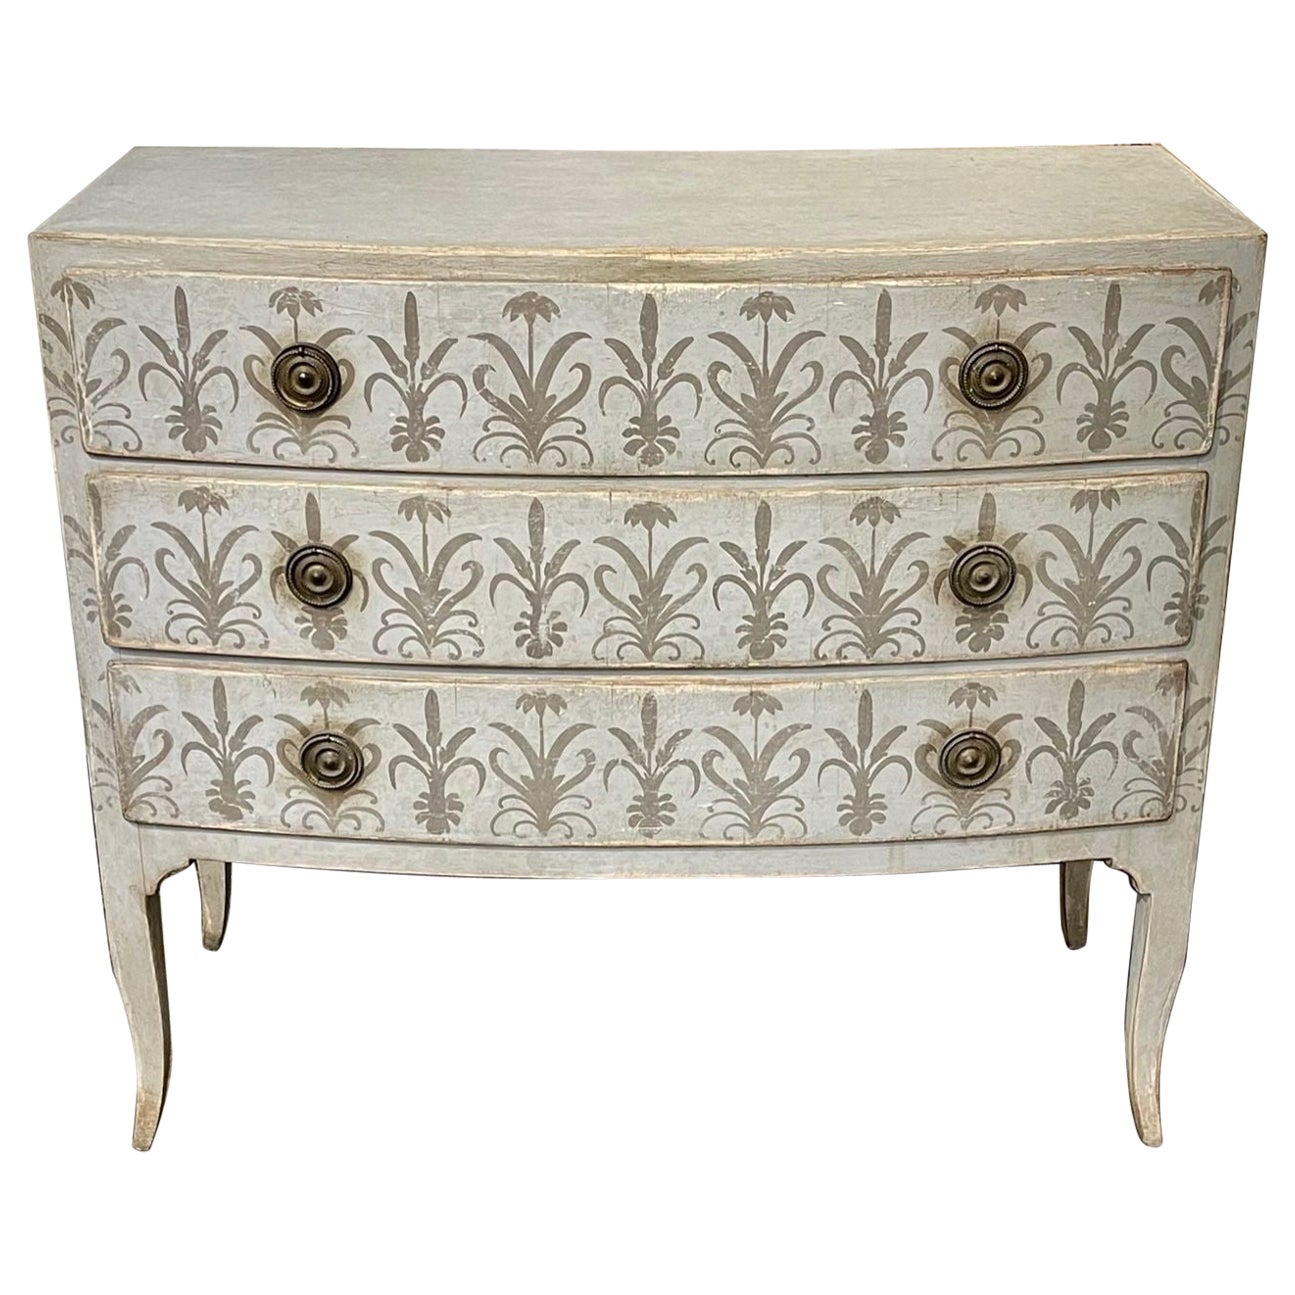 19th Century Italian Neo-Classical Curved Front Painted Commode For Sale